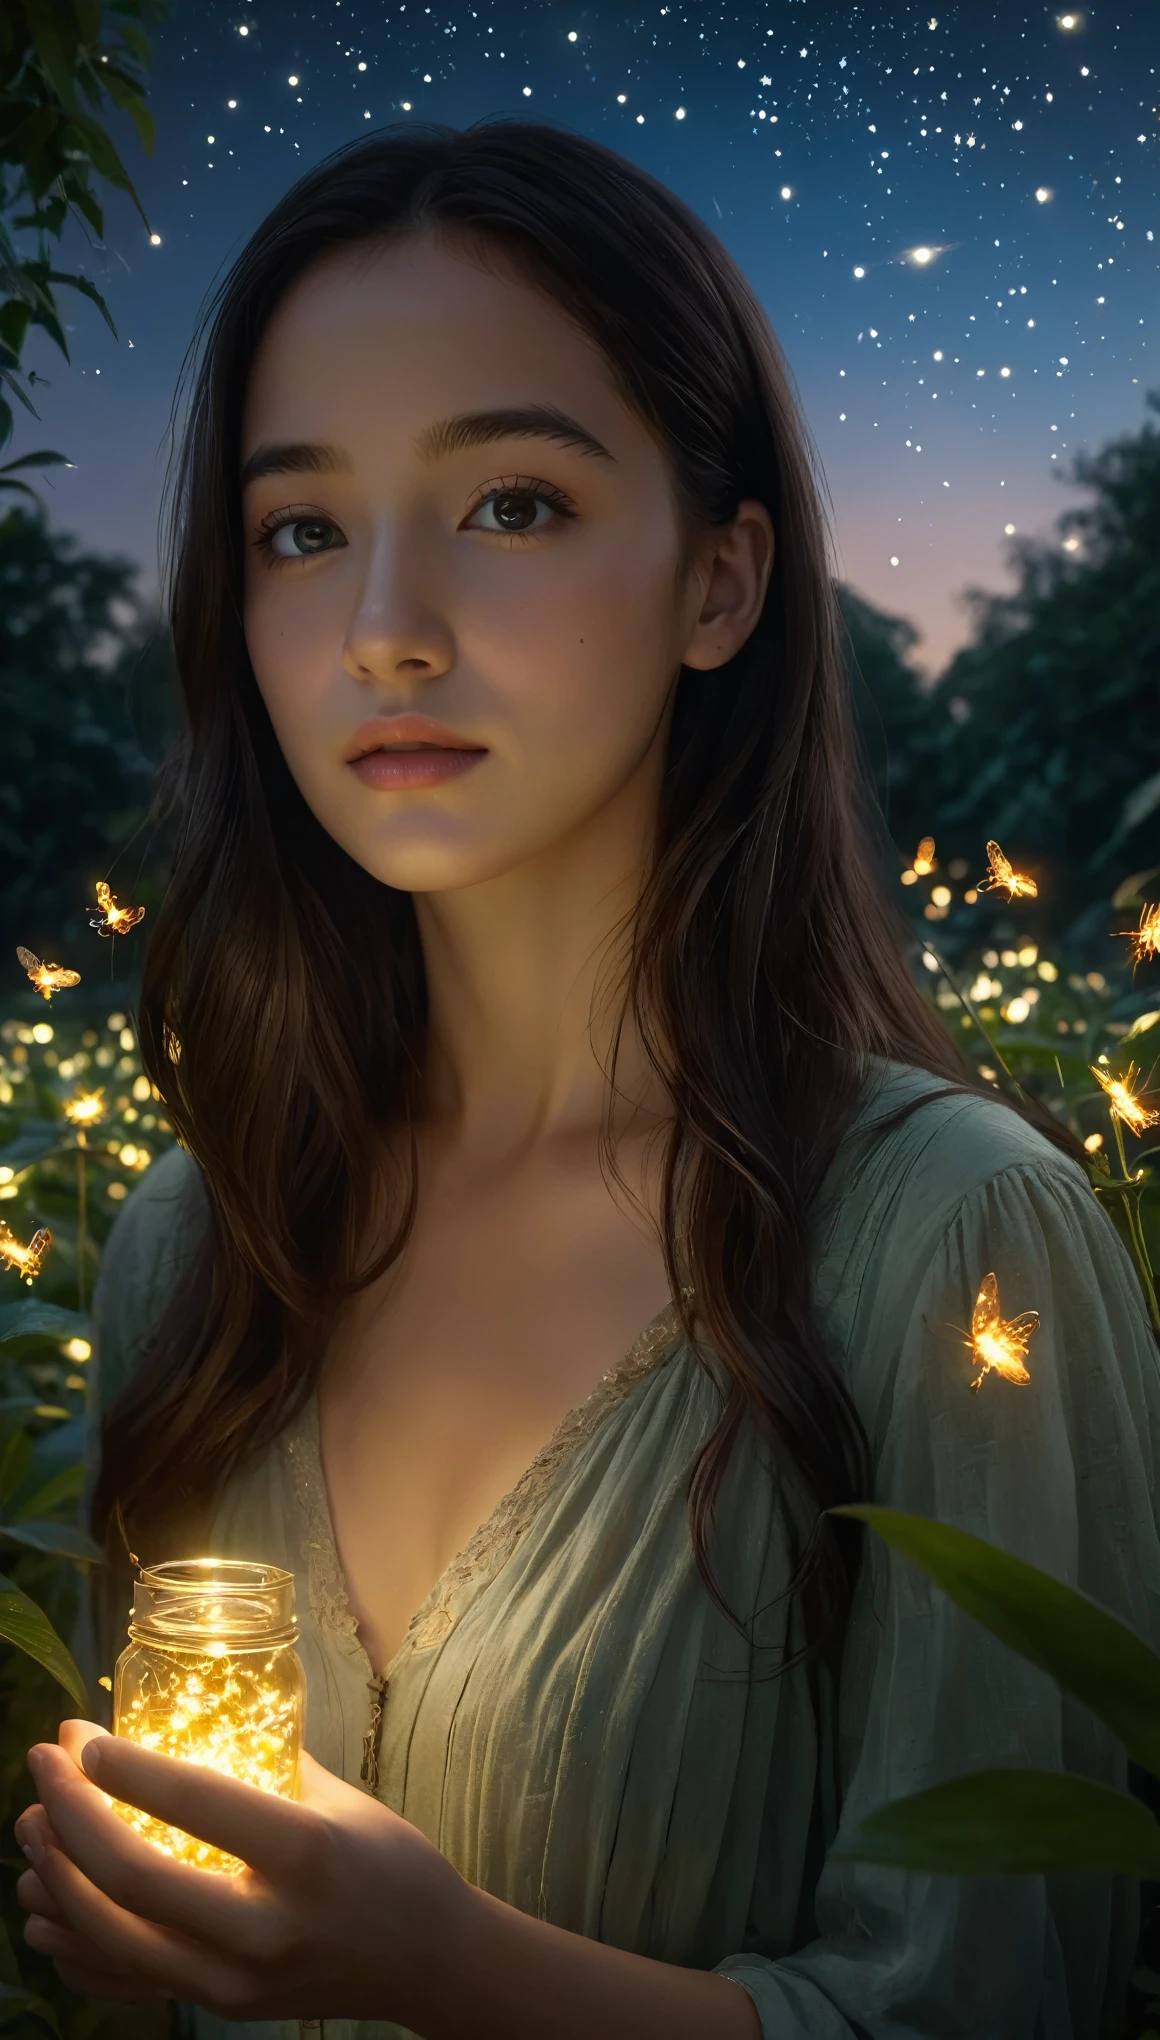 (8K, Highest quality, masterpiece: 1.2), (Realistic, photoRealistic: 1.37), Super detailed, One beautiful girl, Wide viewing angles, Firefly Garden, Lots of little faint lights and fireflies flying around, night